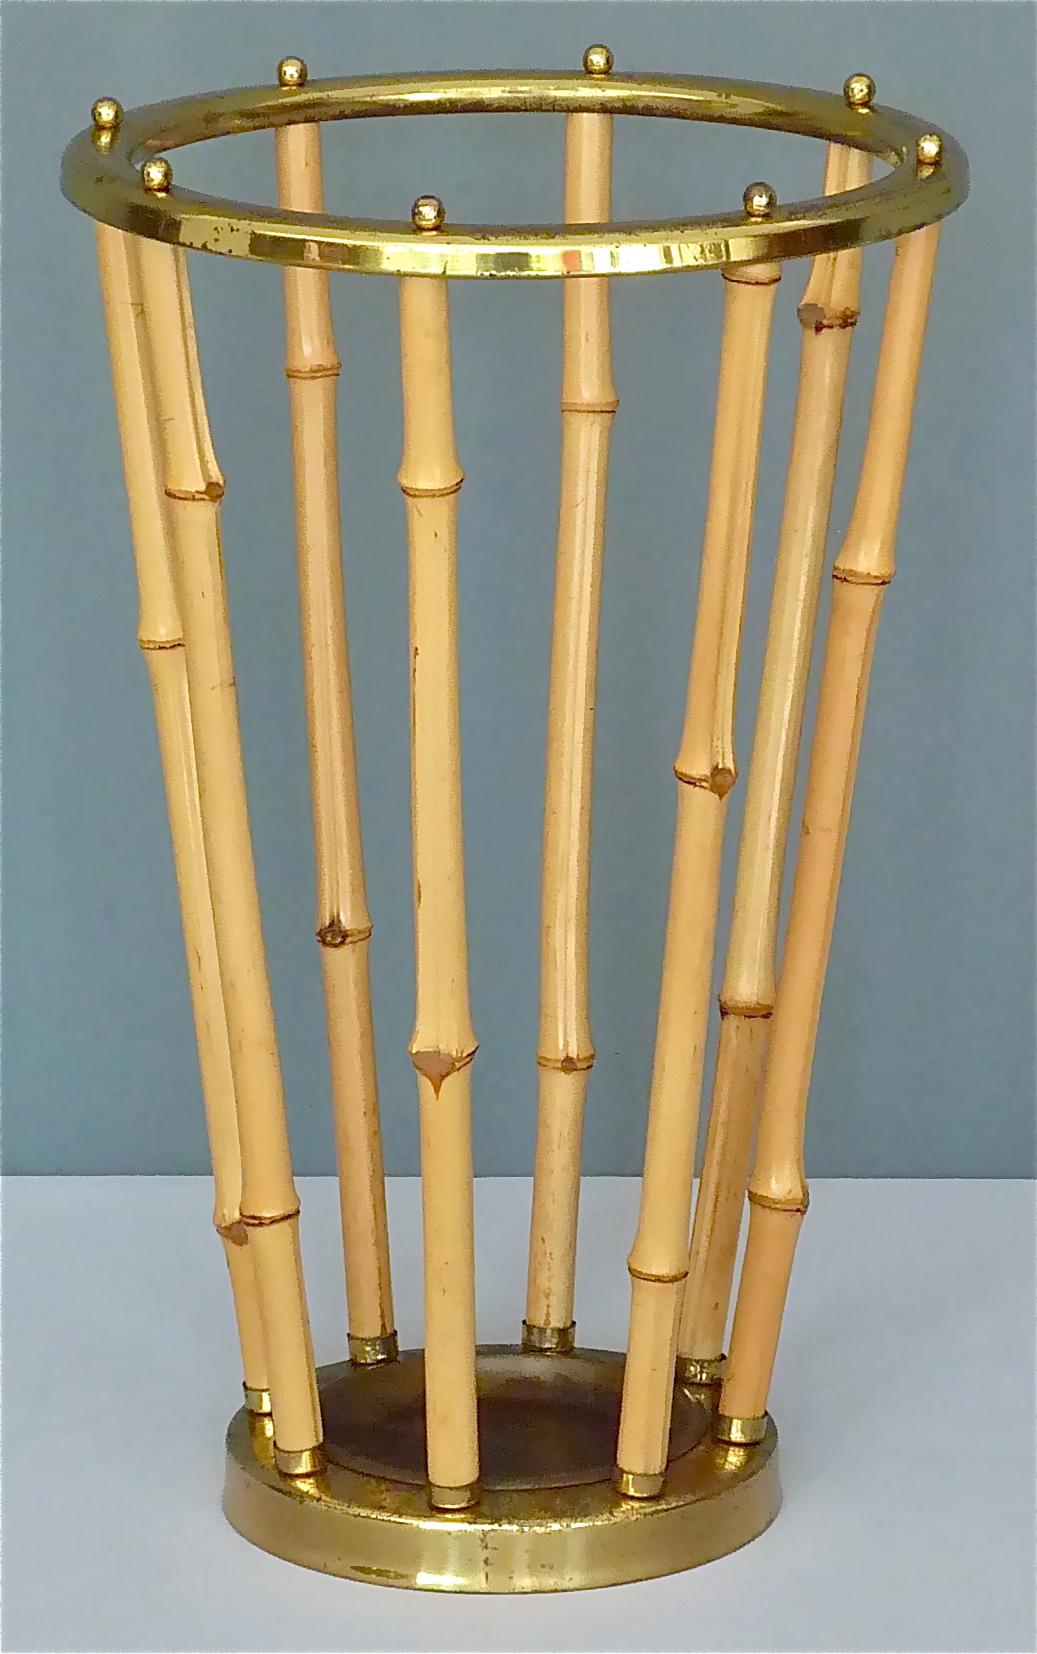 Beautiful midcentury 1950s Austrian umbrella stand, which probably belongs to one of the wonderful designs by Auböck, Hagenauer, Josef Frank for Haus & Garten or Kalmar. It is made of bamboo and patinated brass with lovely small ball screw nuts. The